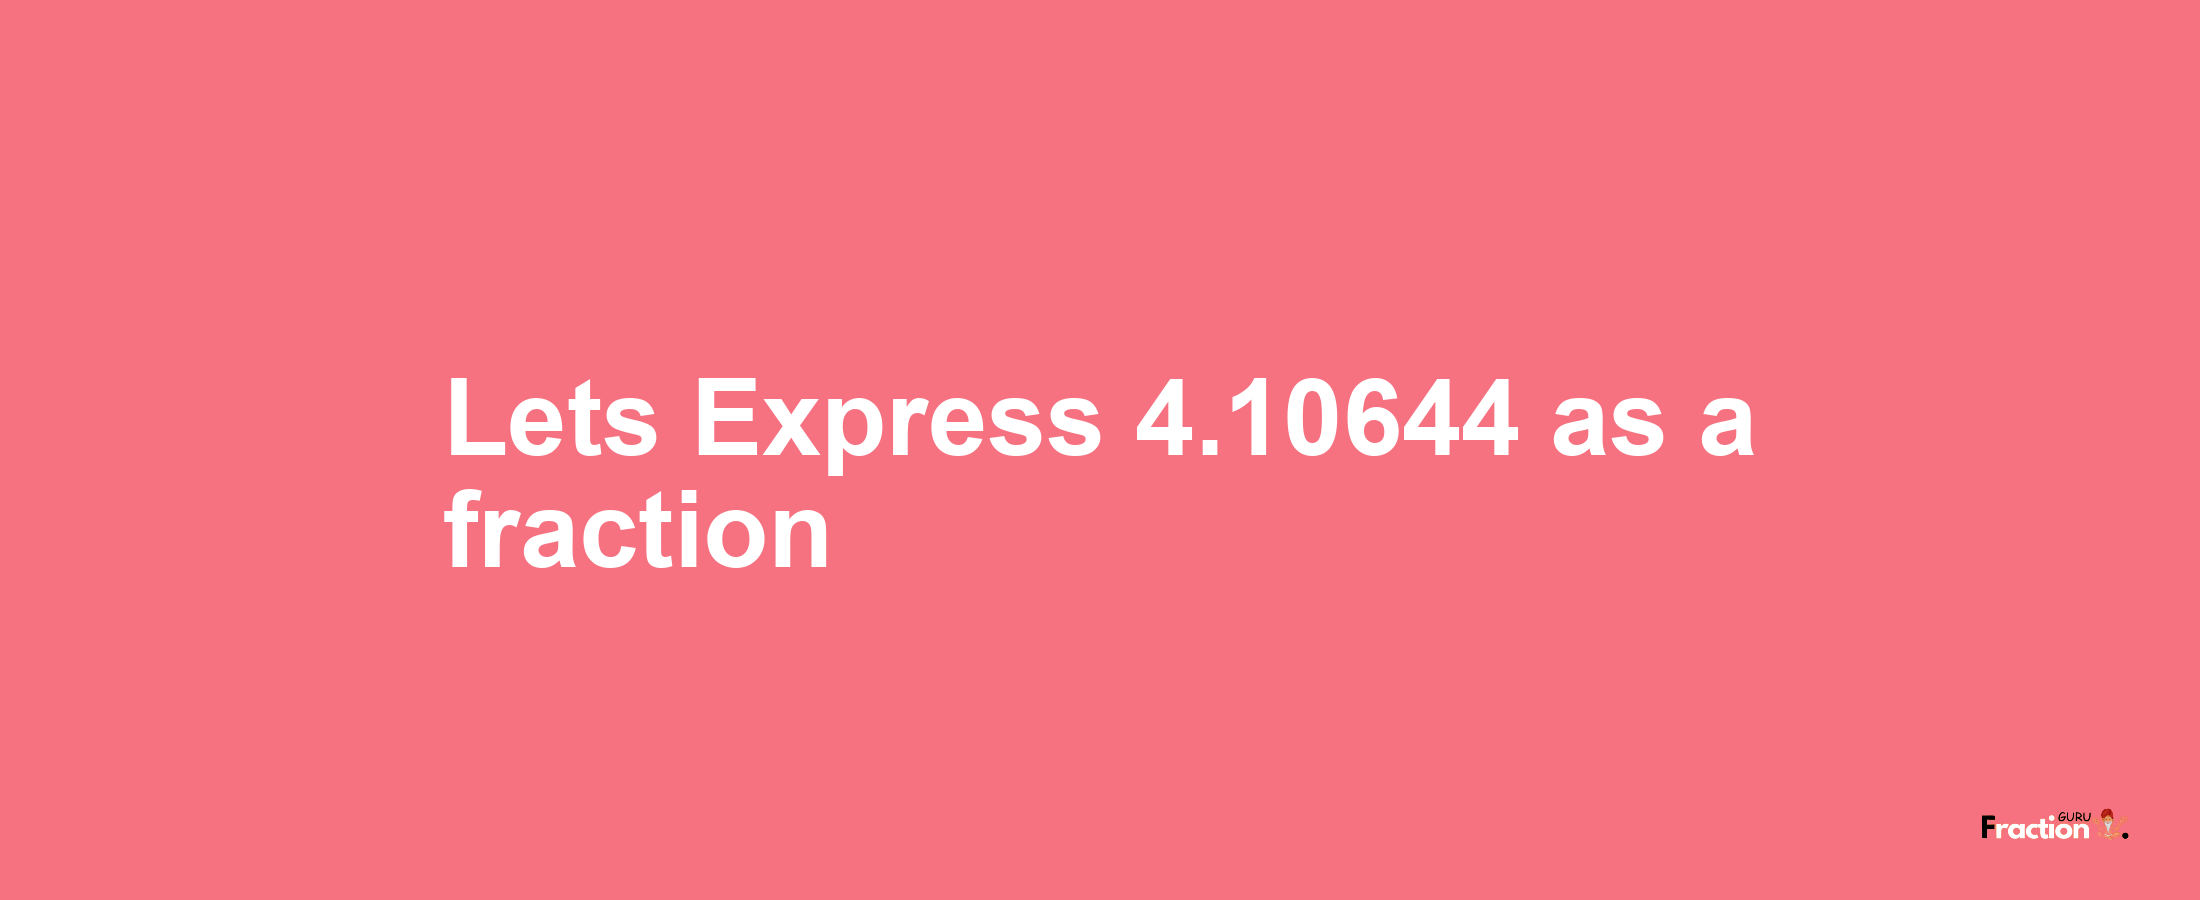 Lets Express 4.10644 as afraction